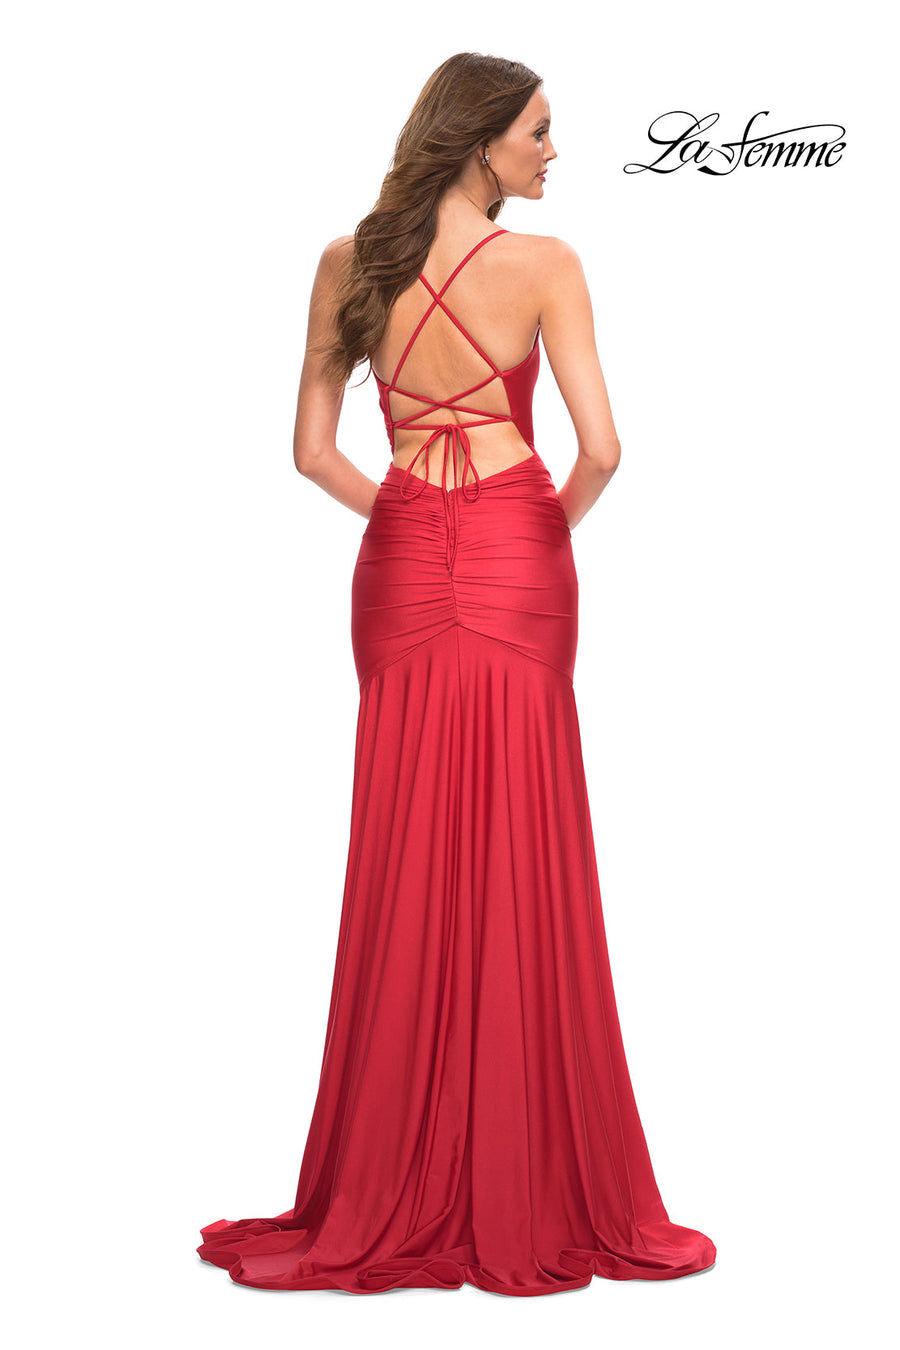 La Femme 30587 prom dress images.  La Femme 30587 is available in these colors: Black, Dark Emerald, Red, Royal Blue.